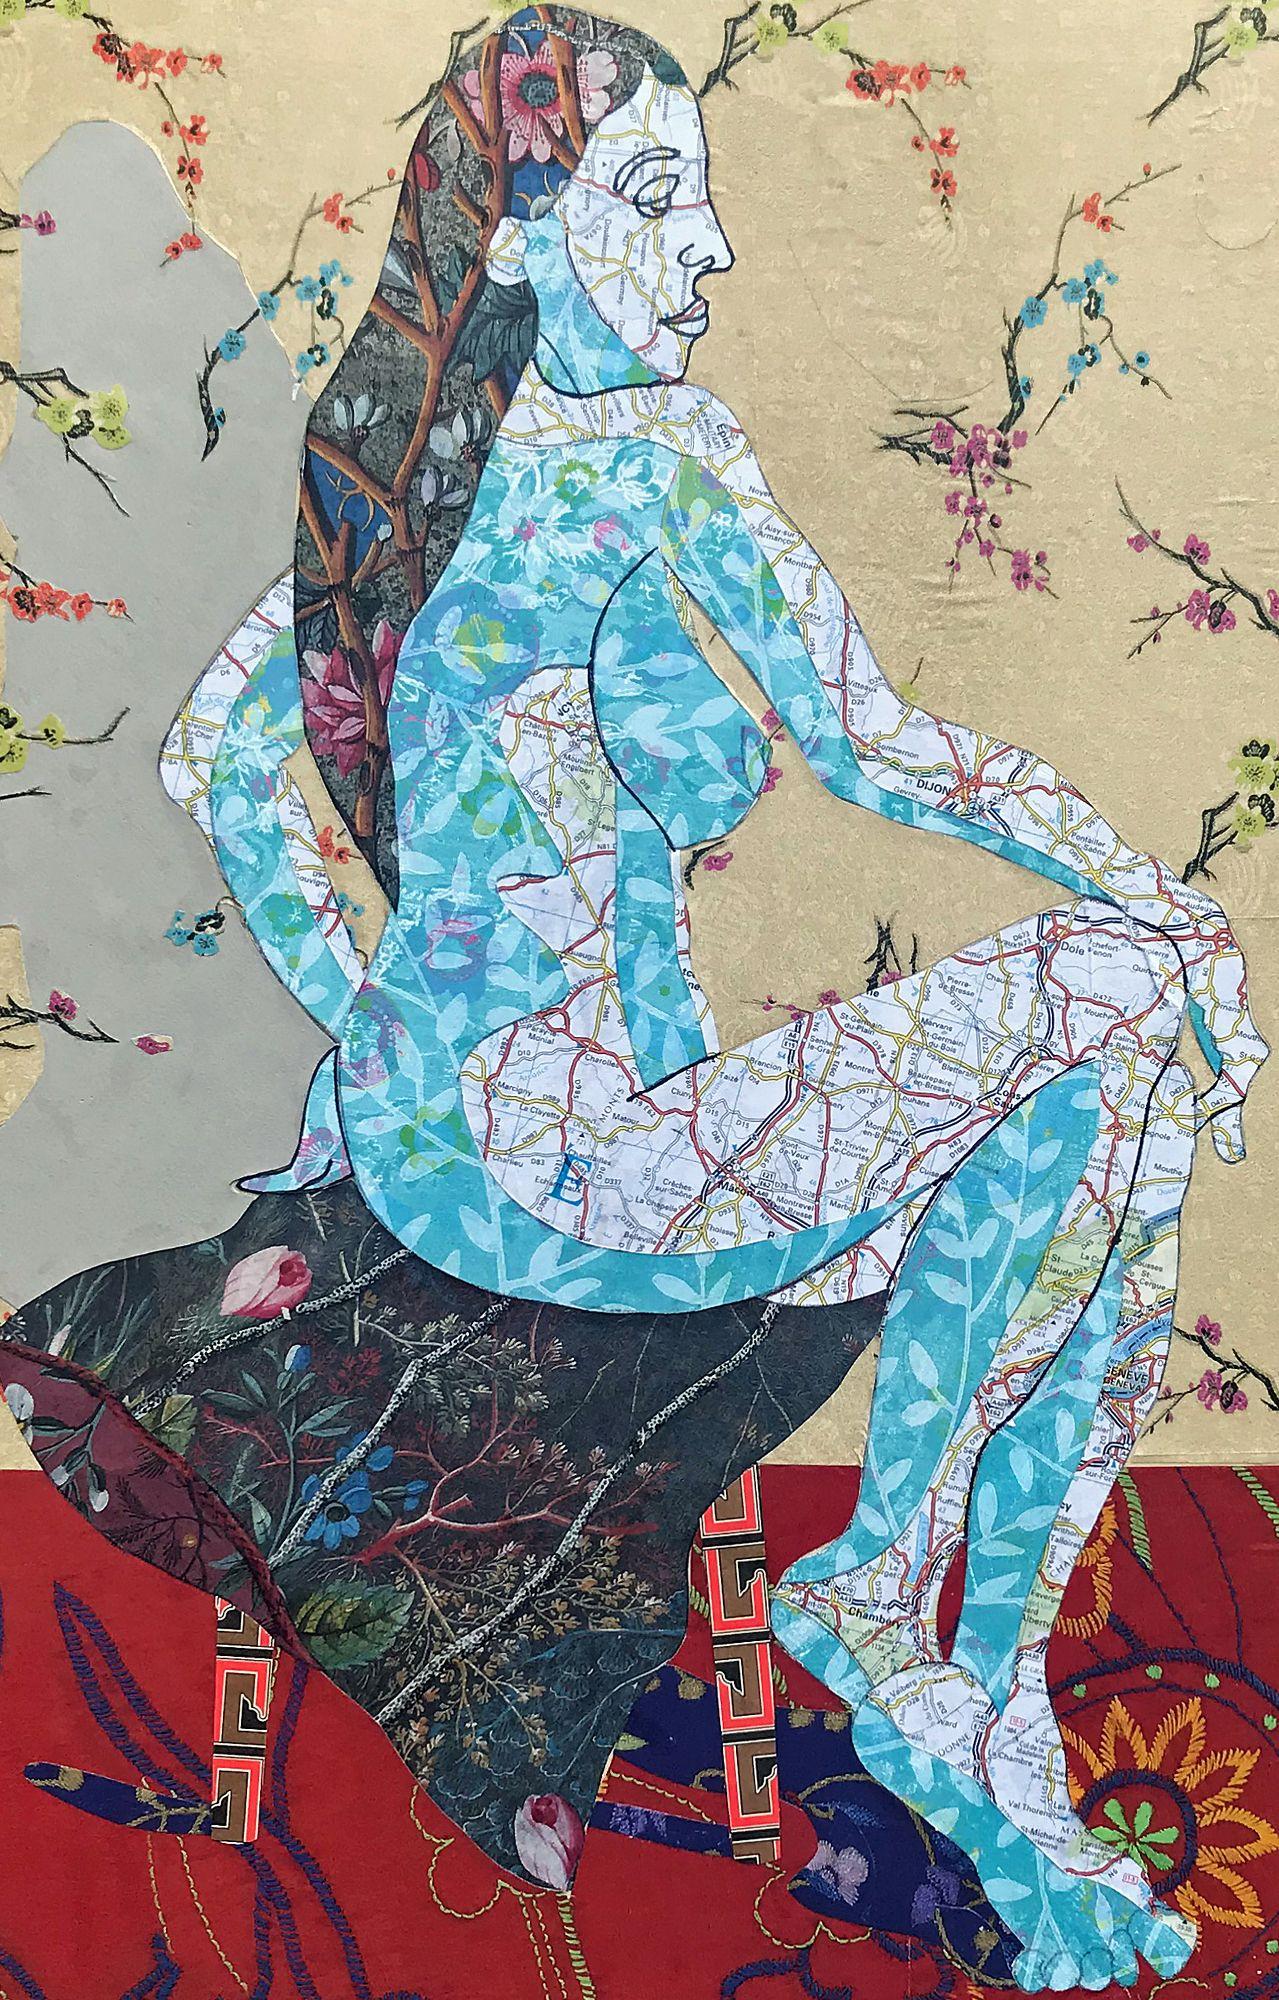 Woman in Thought is a collaged figurative work on a cradled wood panel. I love to draw the figure. I make collages of my drawings of the female figure, which are then placed into imagined settings. I use paint, maps, ink, vintage wrapping paper,